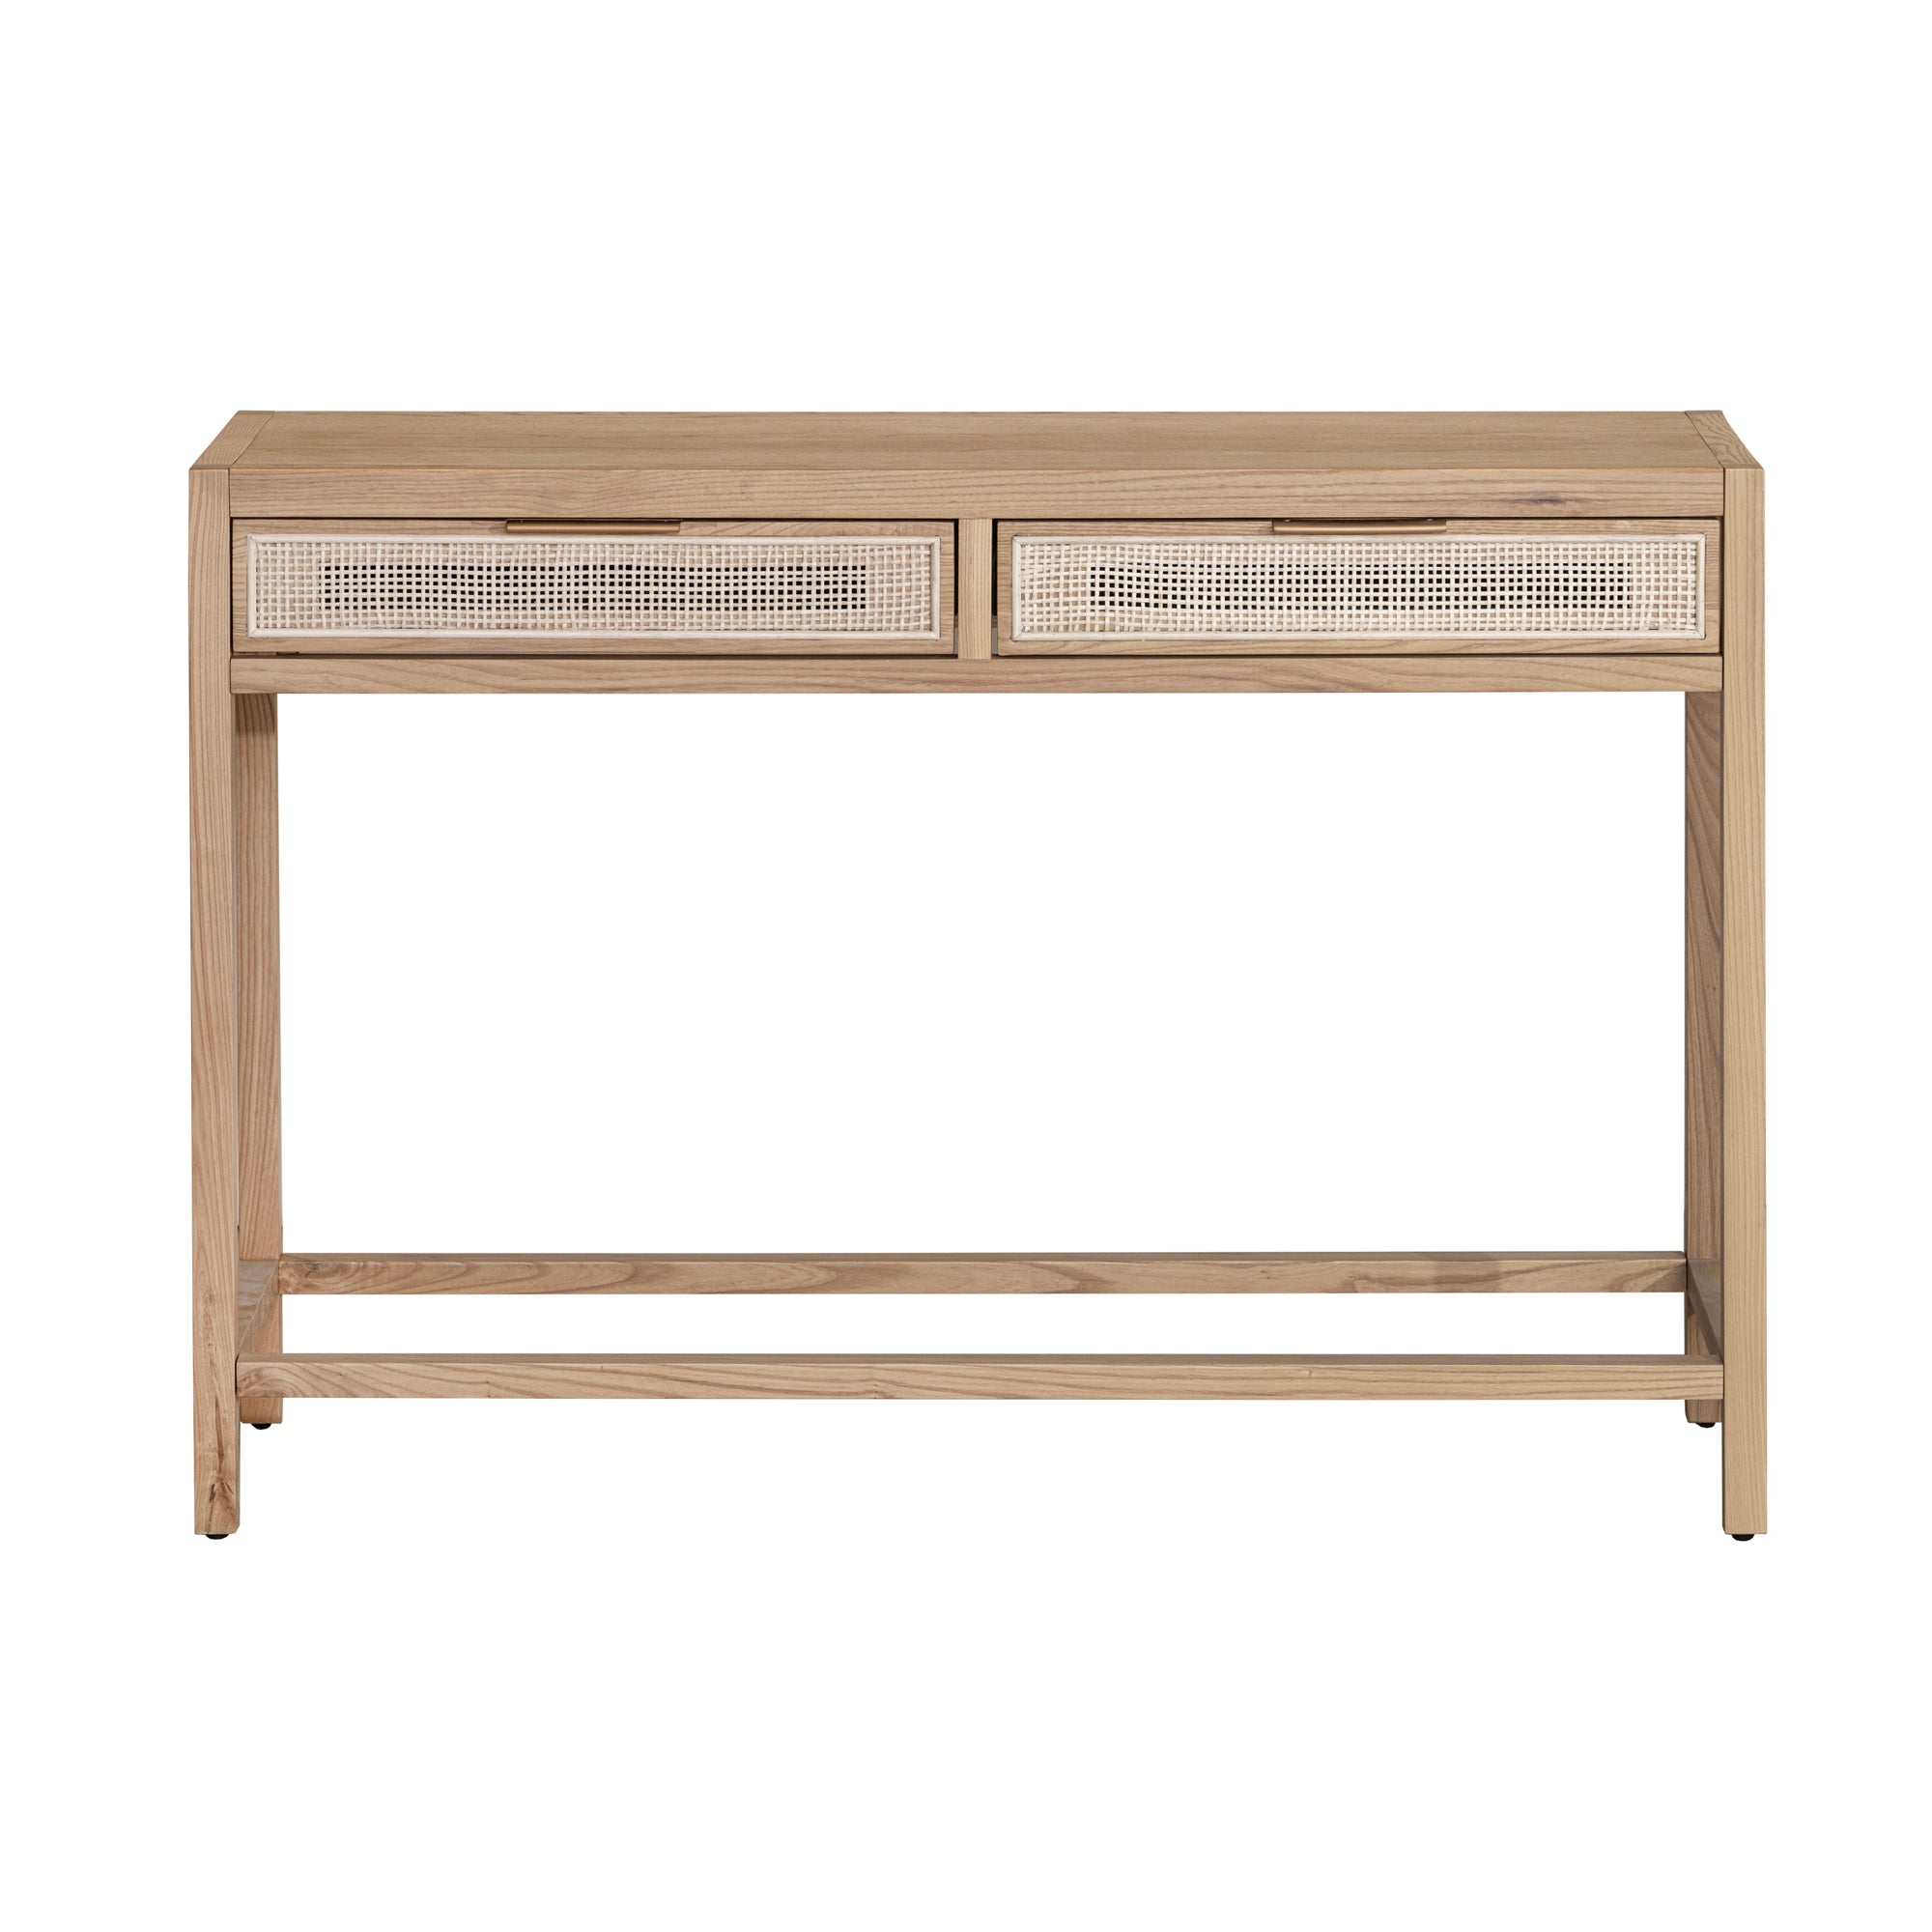 LH Imports, Rattana Console Table